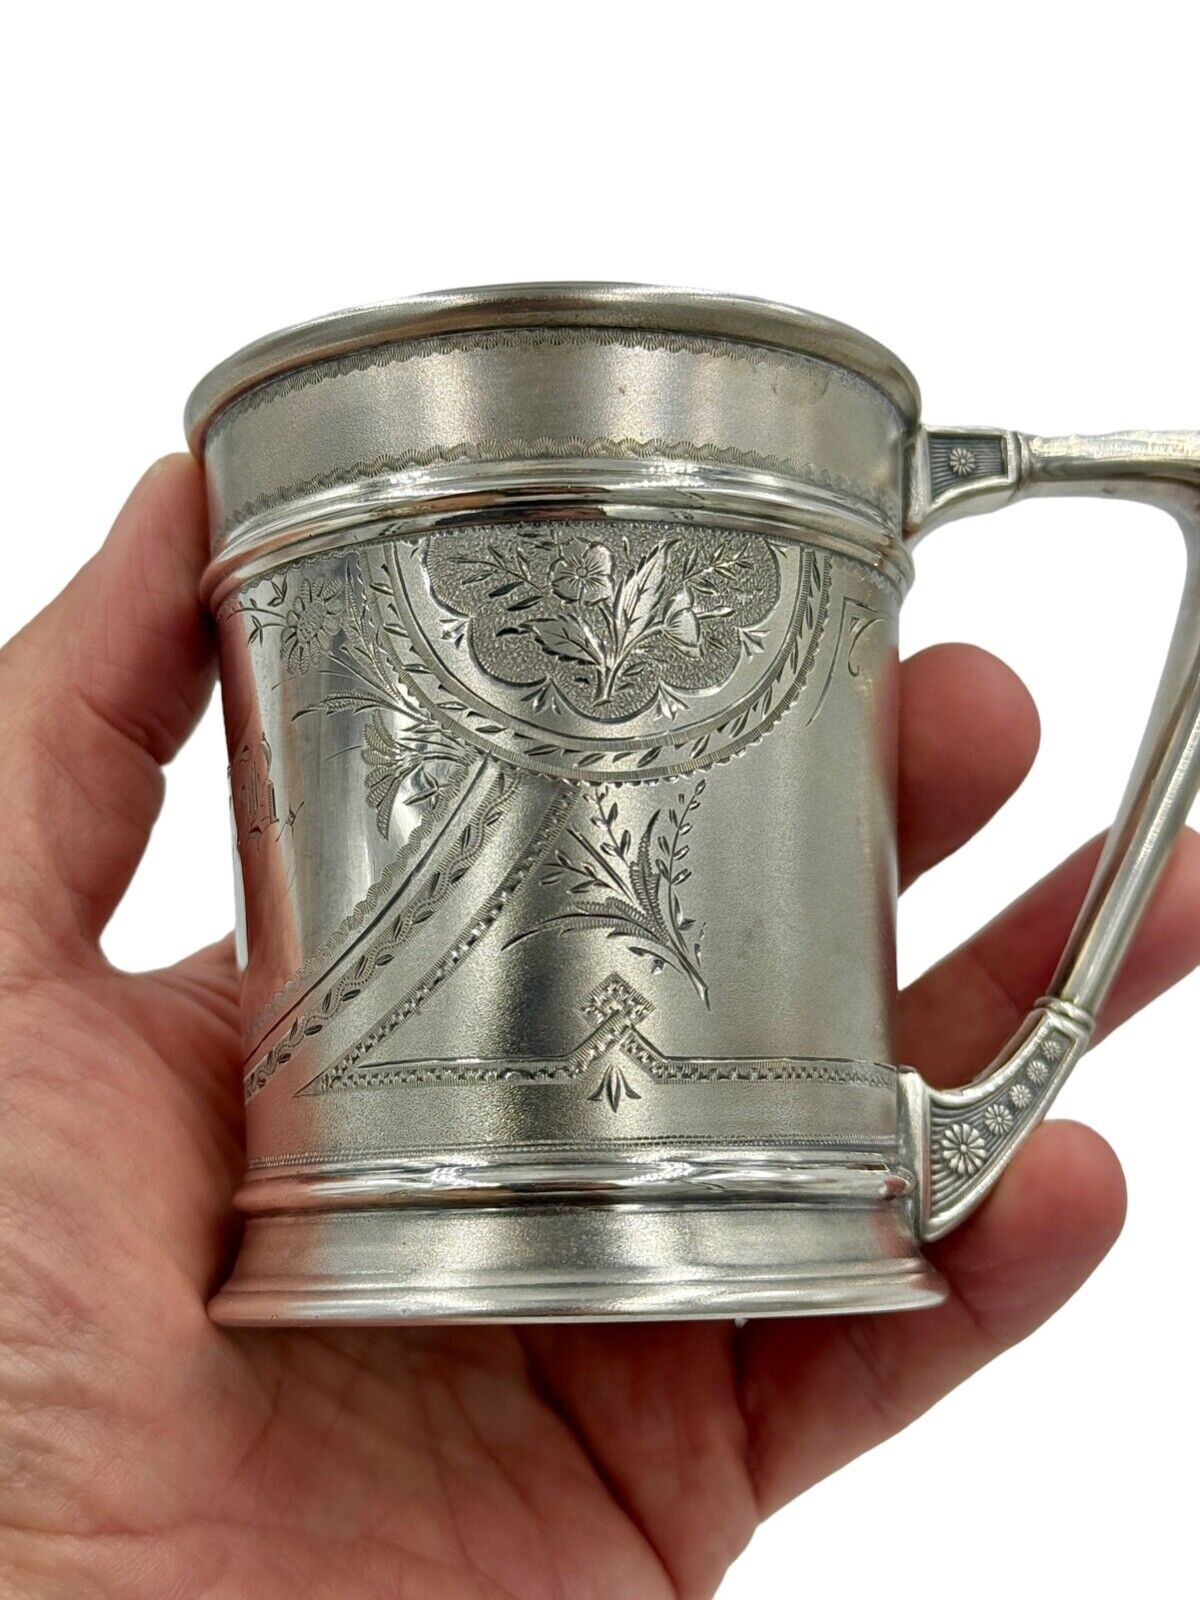 Antique Whiting Manufacturing Co. Aesthetic Sterling Silver Cup Mug